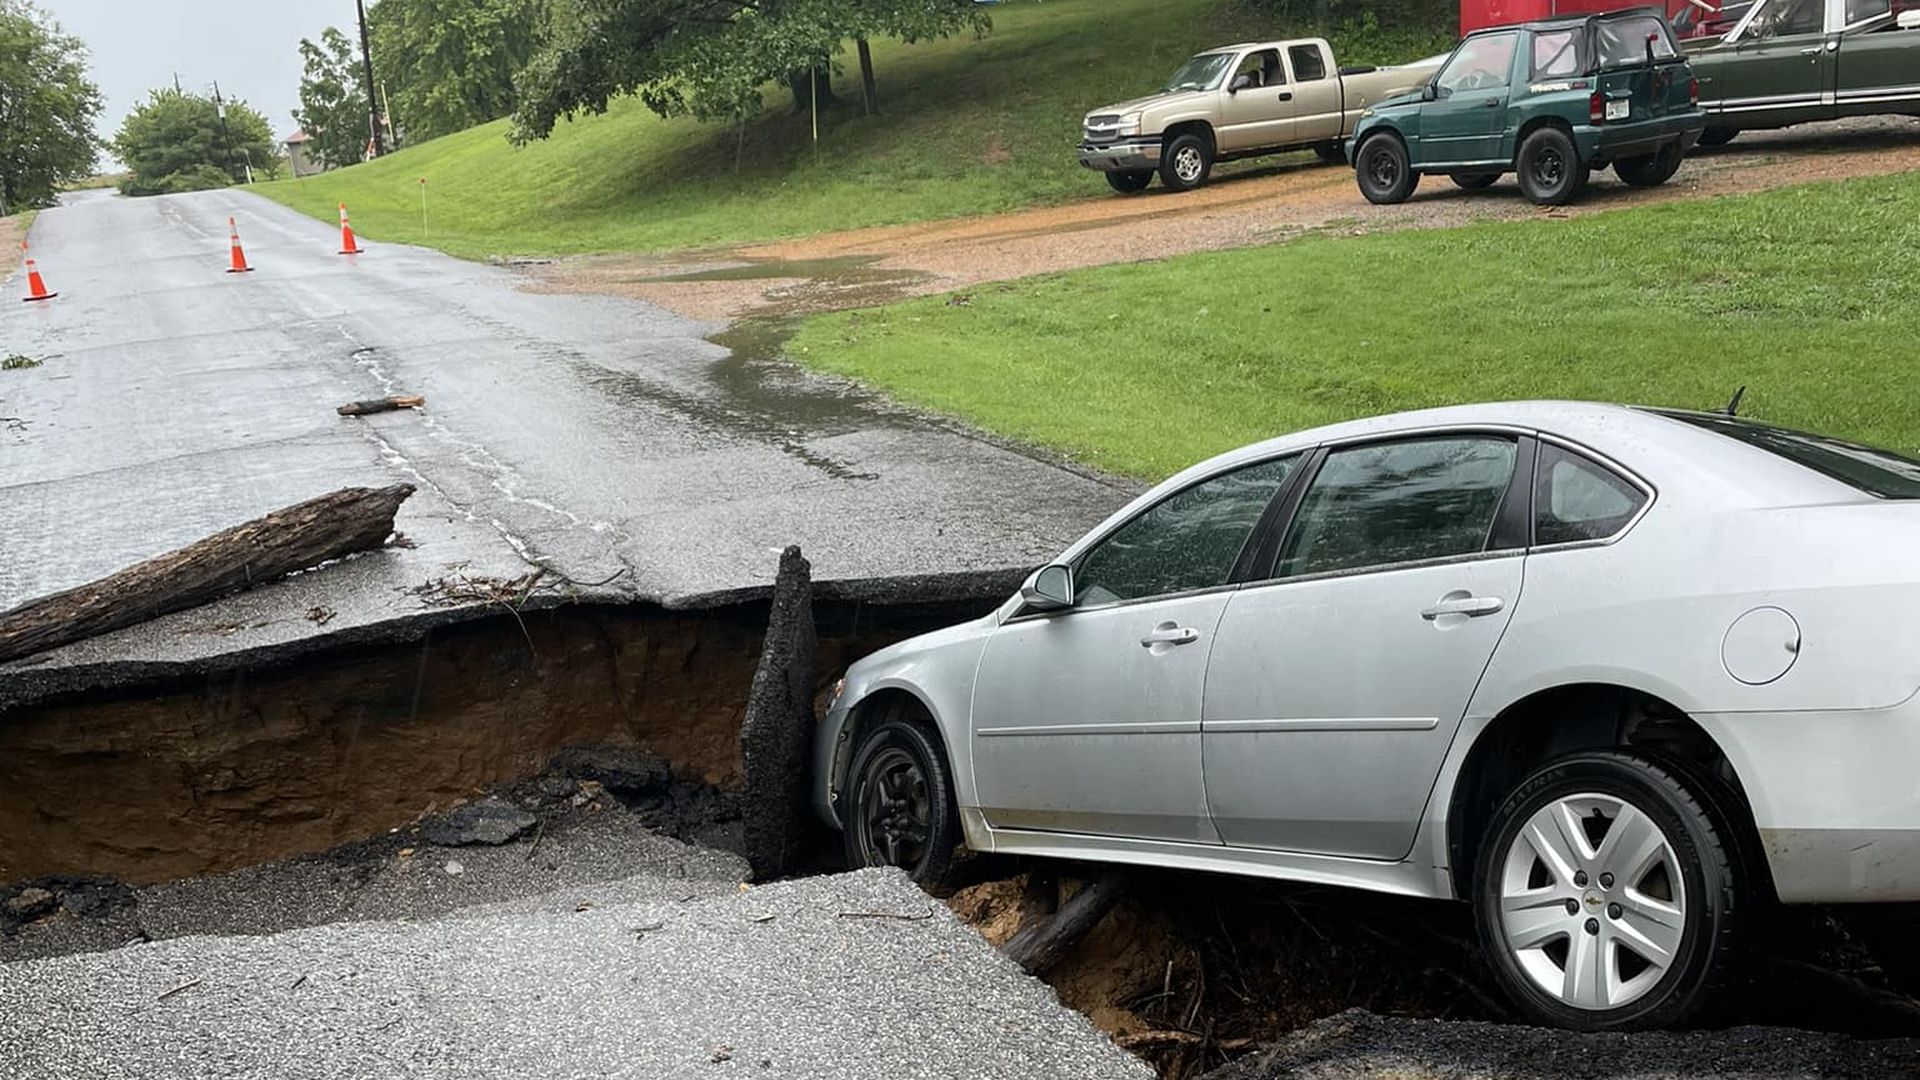 An image of a car stuck in a hole in the road caused by a washout in Mayfield, Kentucky.